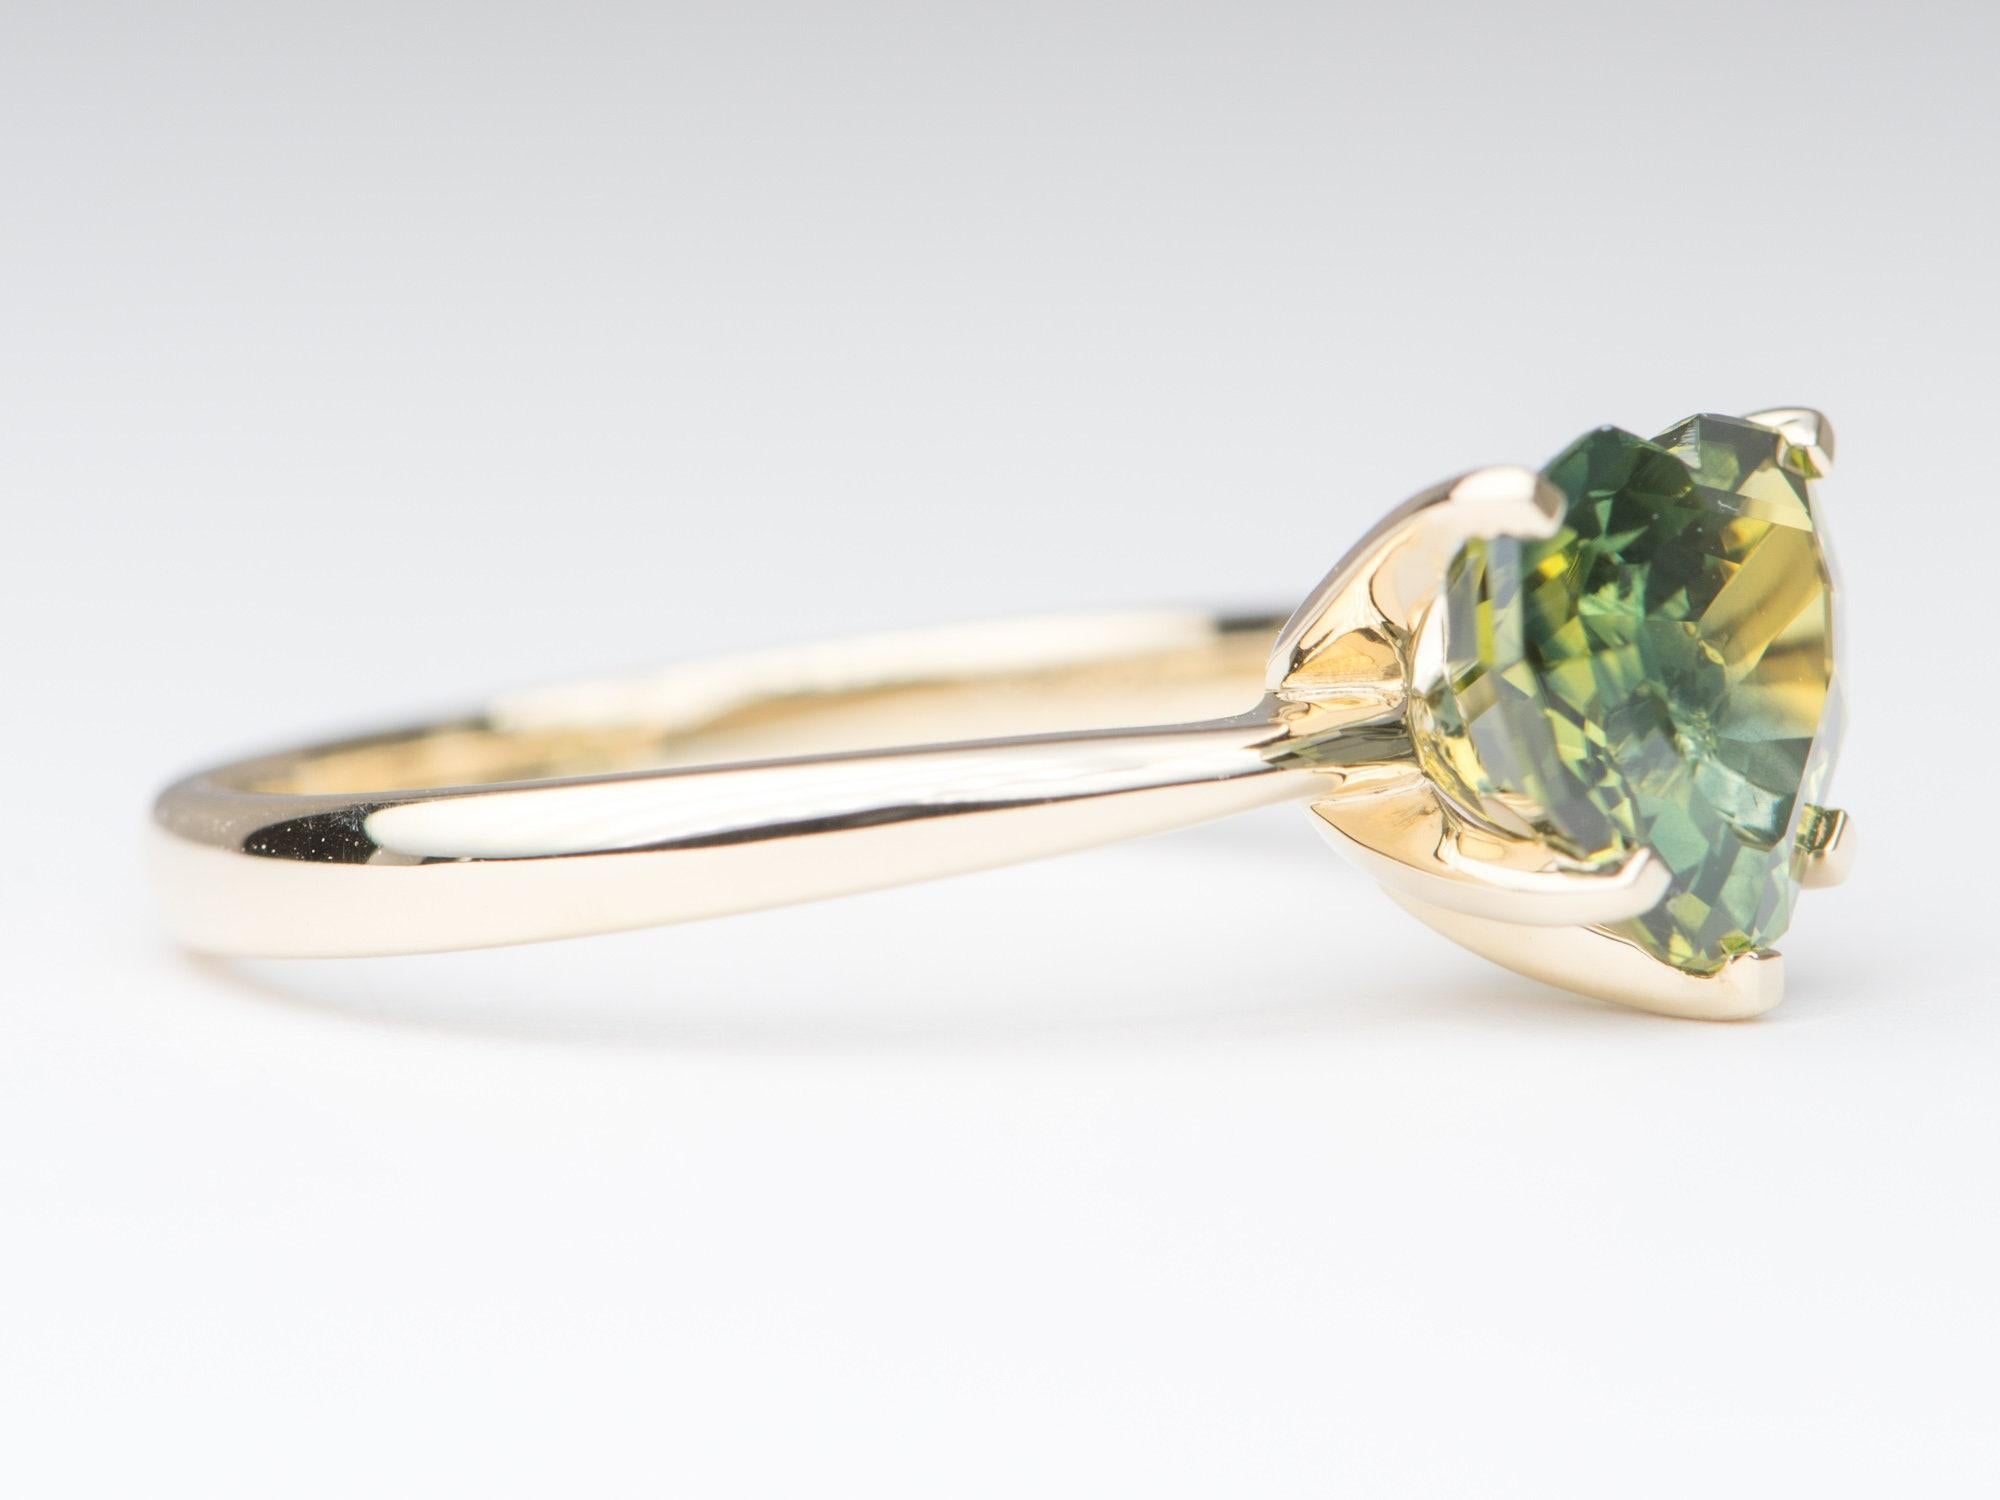 â™¥ A solid 14K yellow gold ring set with a stunning heart-shaped teal parti sapphire 
â™¥ The overall setting measures 9.1mm in width, 8.5mm in length, and sits 7.1mm tall from the finger

â™¥ Band width: 2.2mm
♥  Ring size: US 7 (Free resizing up